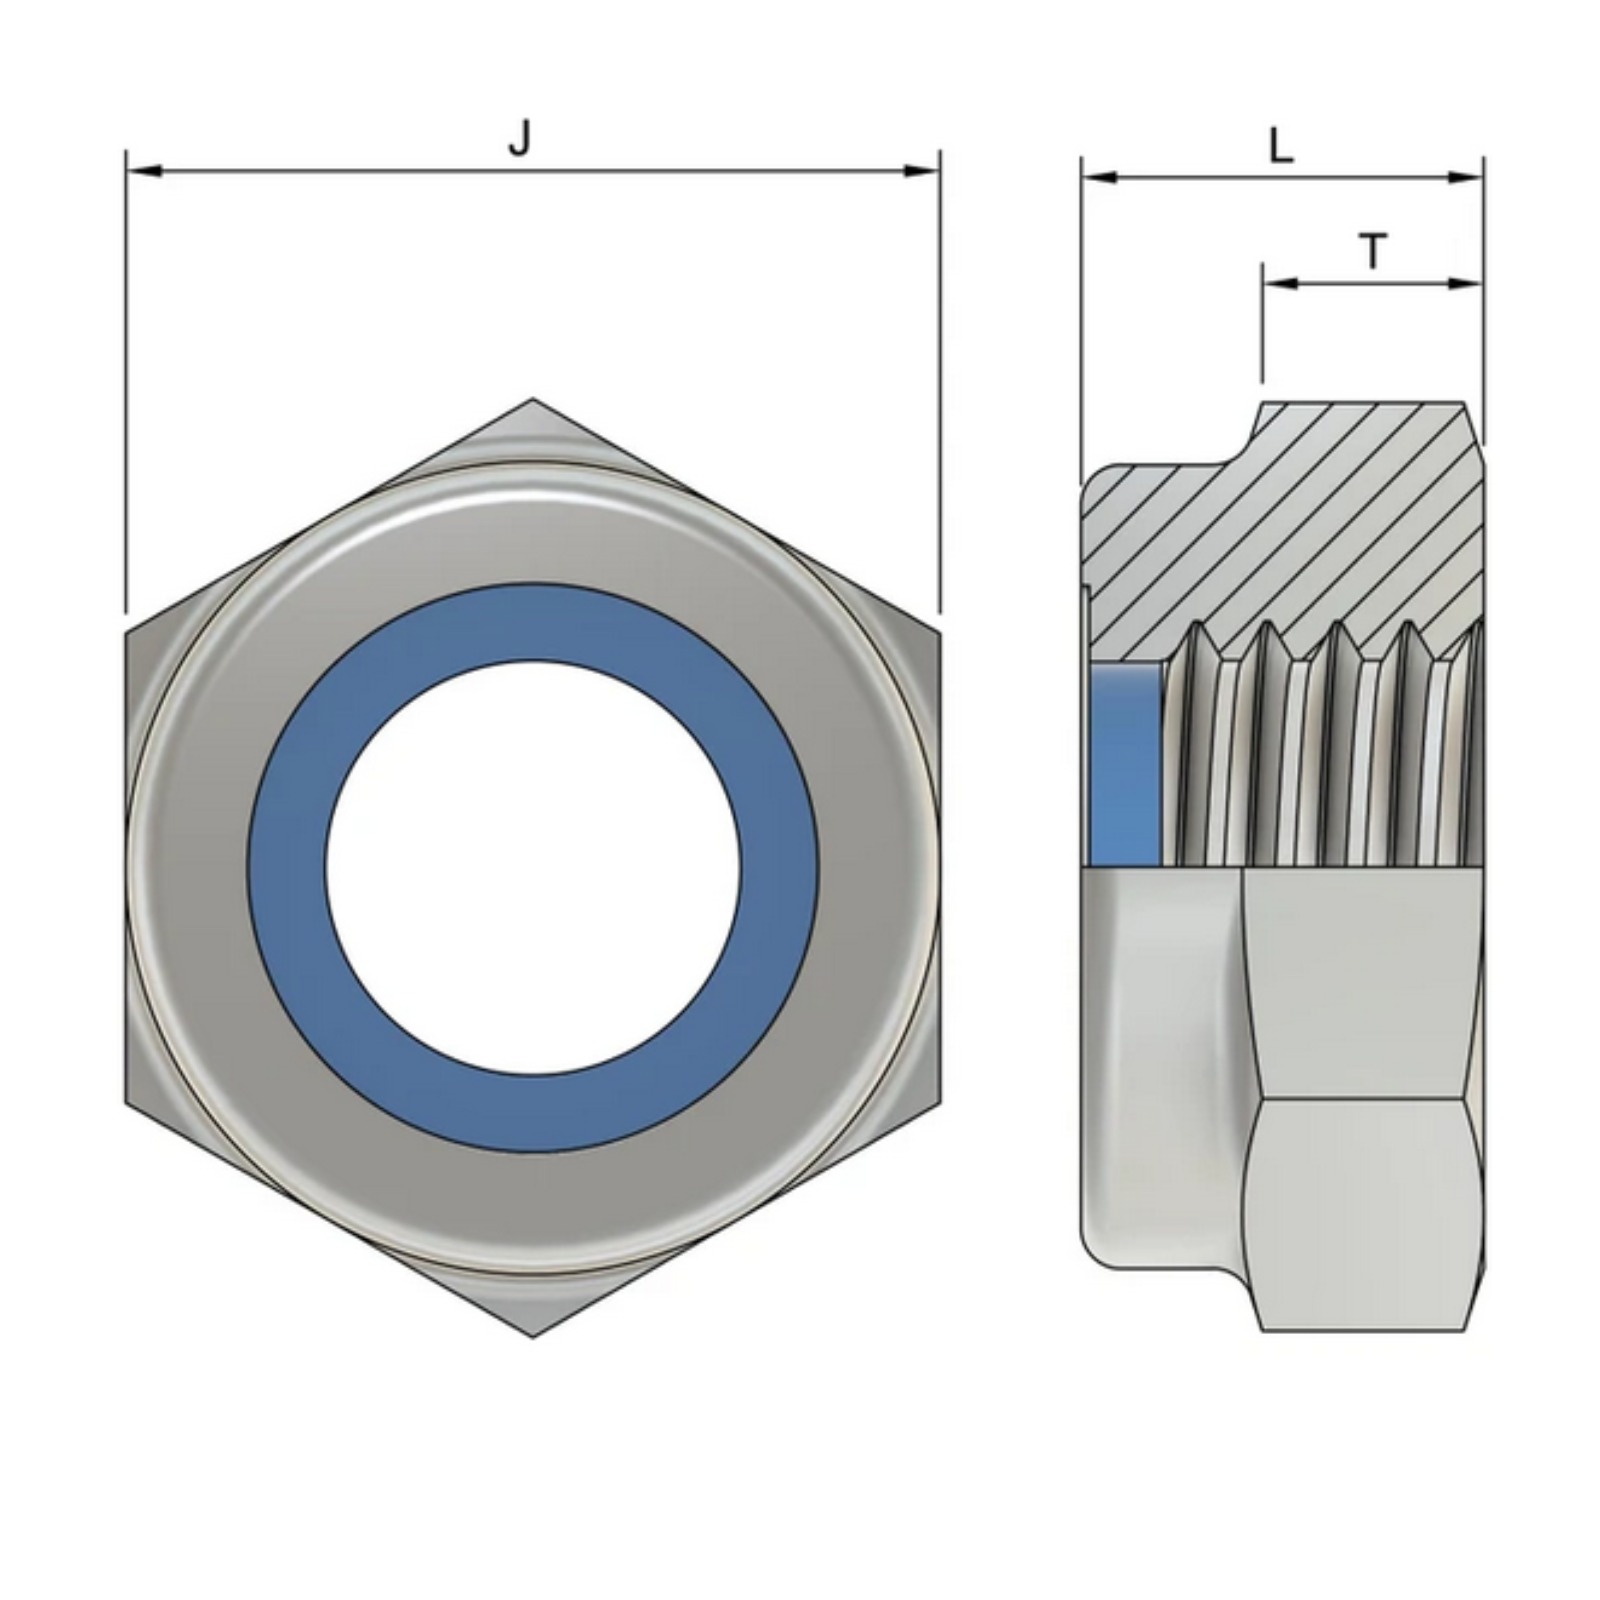 M3 Hexagon Nylon Locking Nuts (DIN 985) - Stainless Steel (A2)